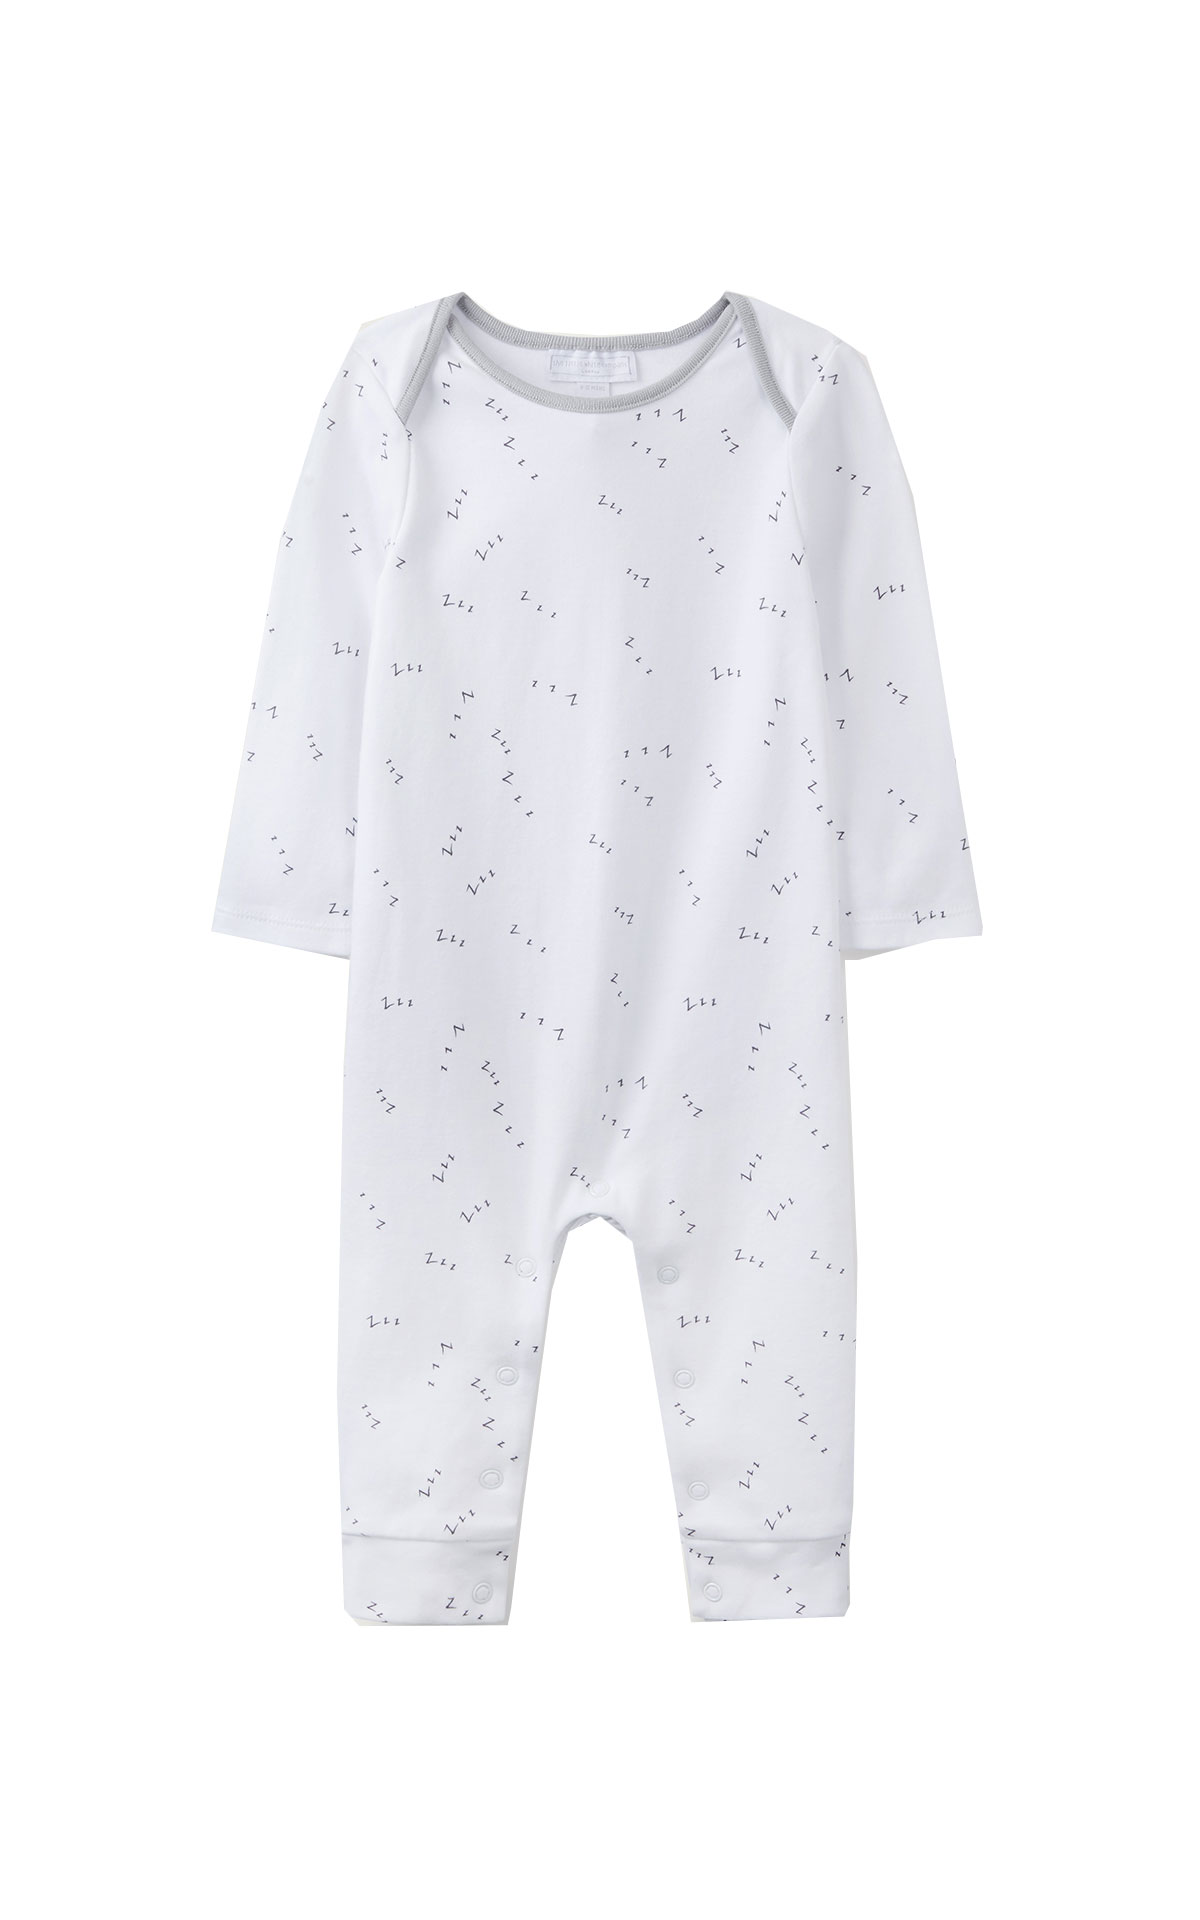 The White Company Zzz print sleepsuit from Bicester Village